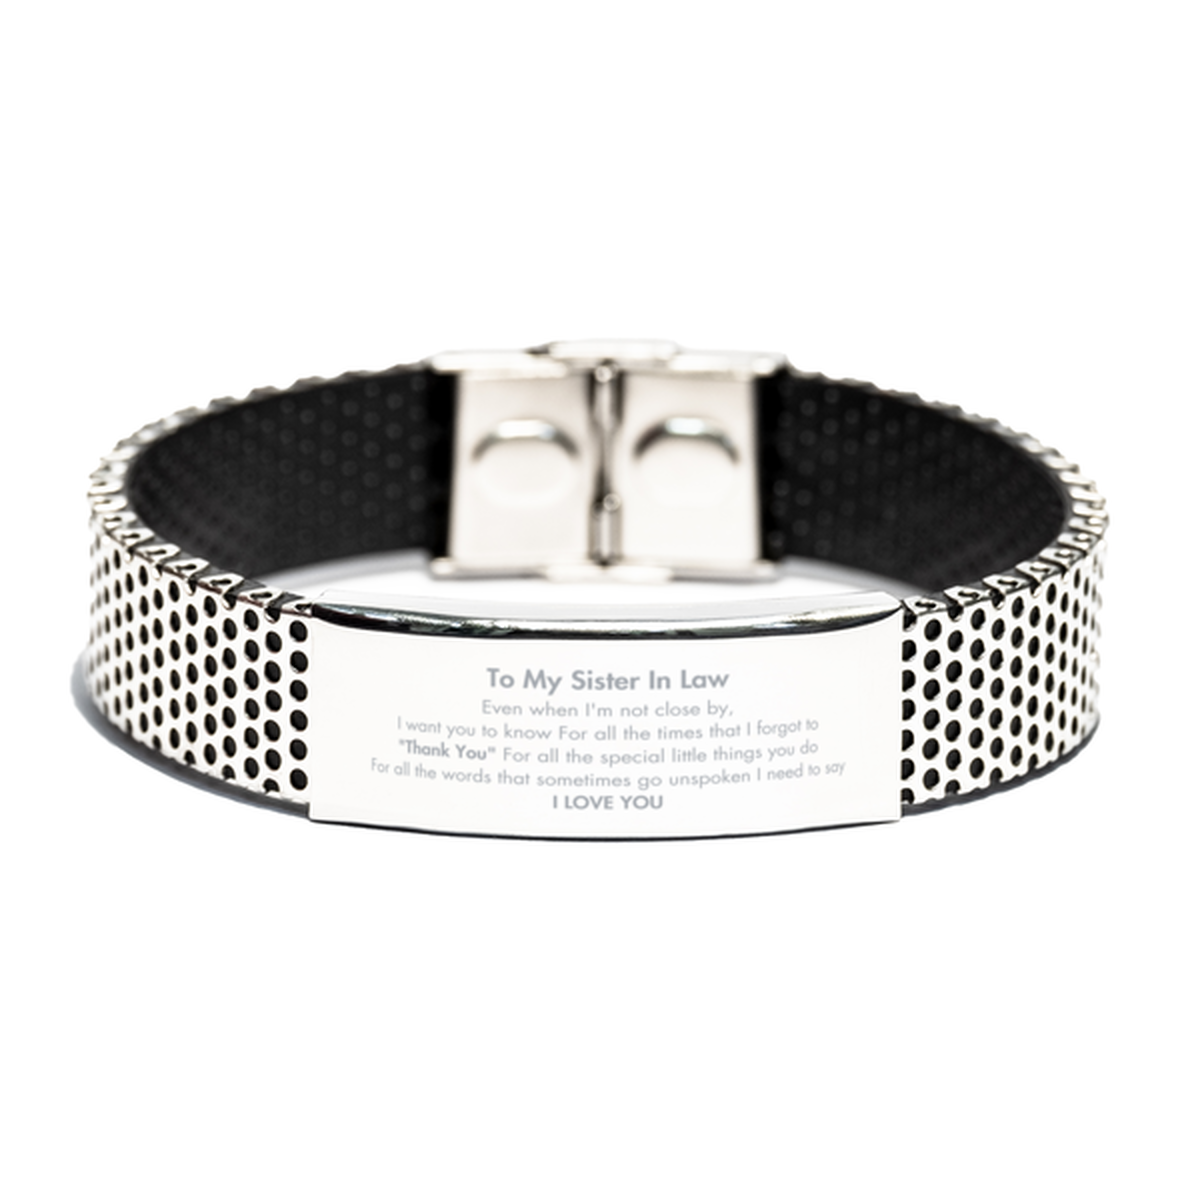 Thank You Gifts for Sister In Law, Keepsake Stainless Steel Bracelet Gifts for Sister In Law Birthday Mother's day Father's Day Sister In Law For all the words That sometimes go unspoken I need to say I LOVE YOU